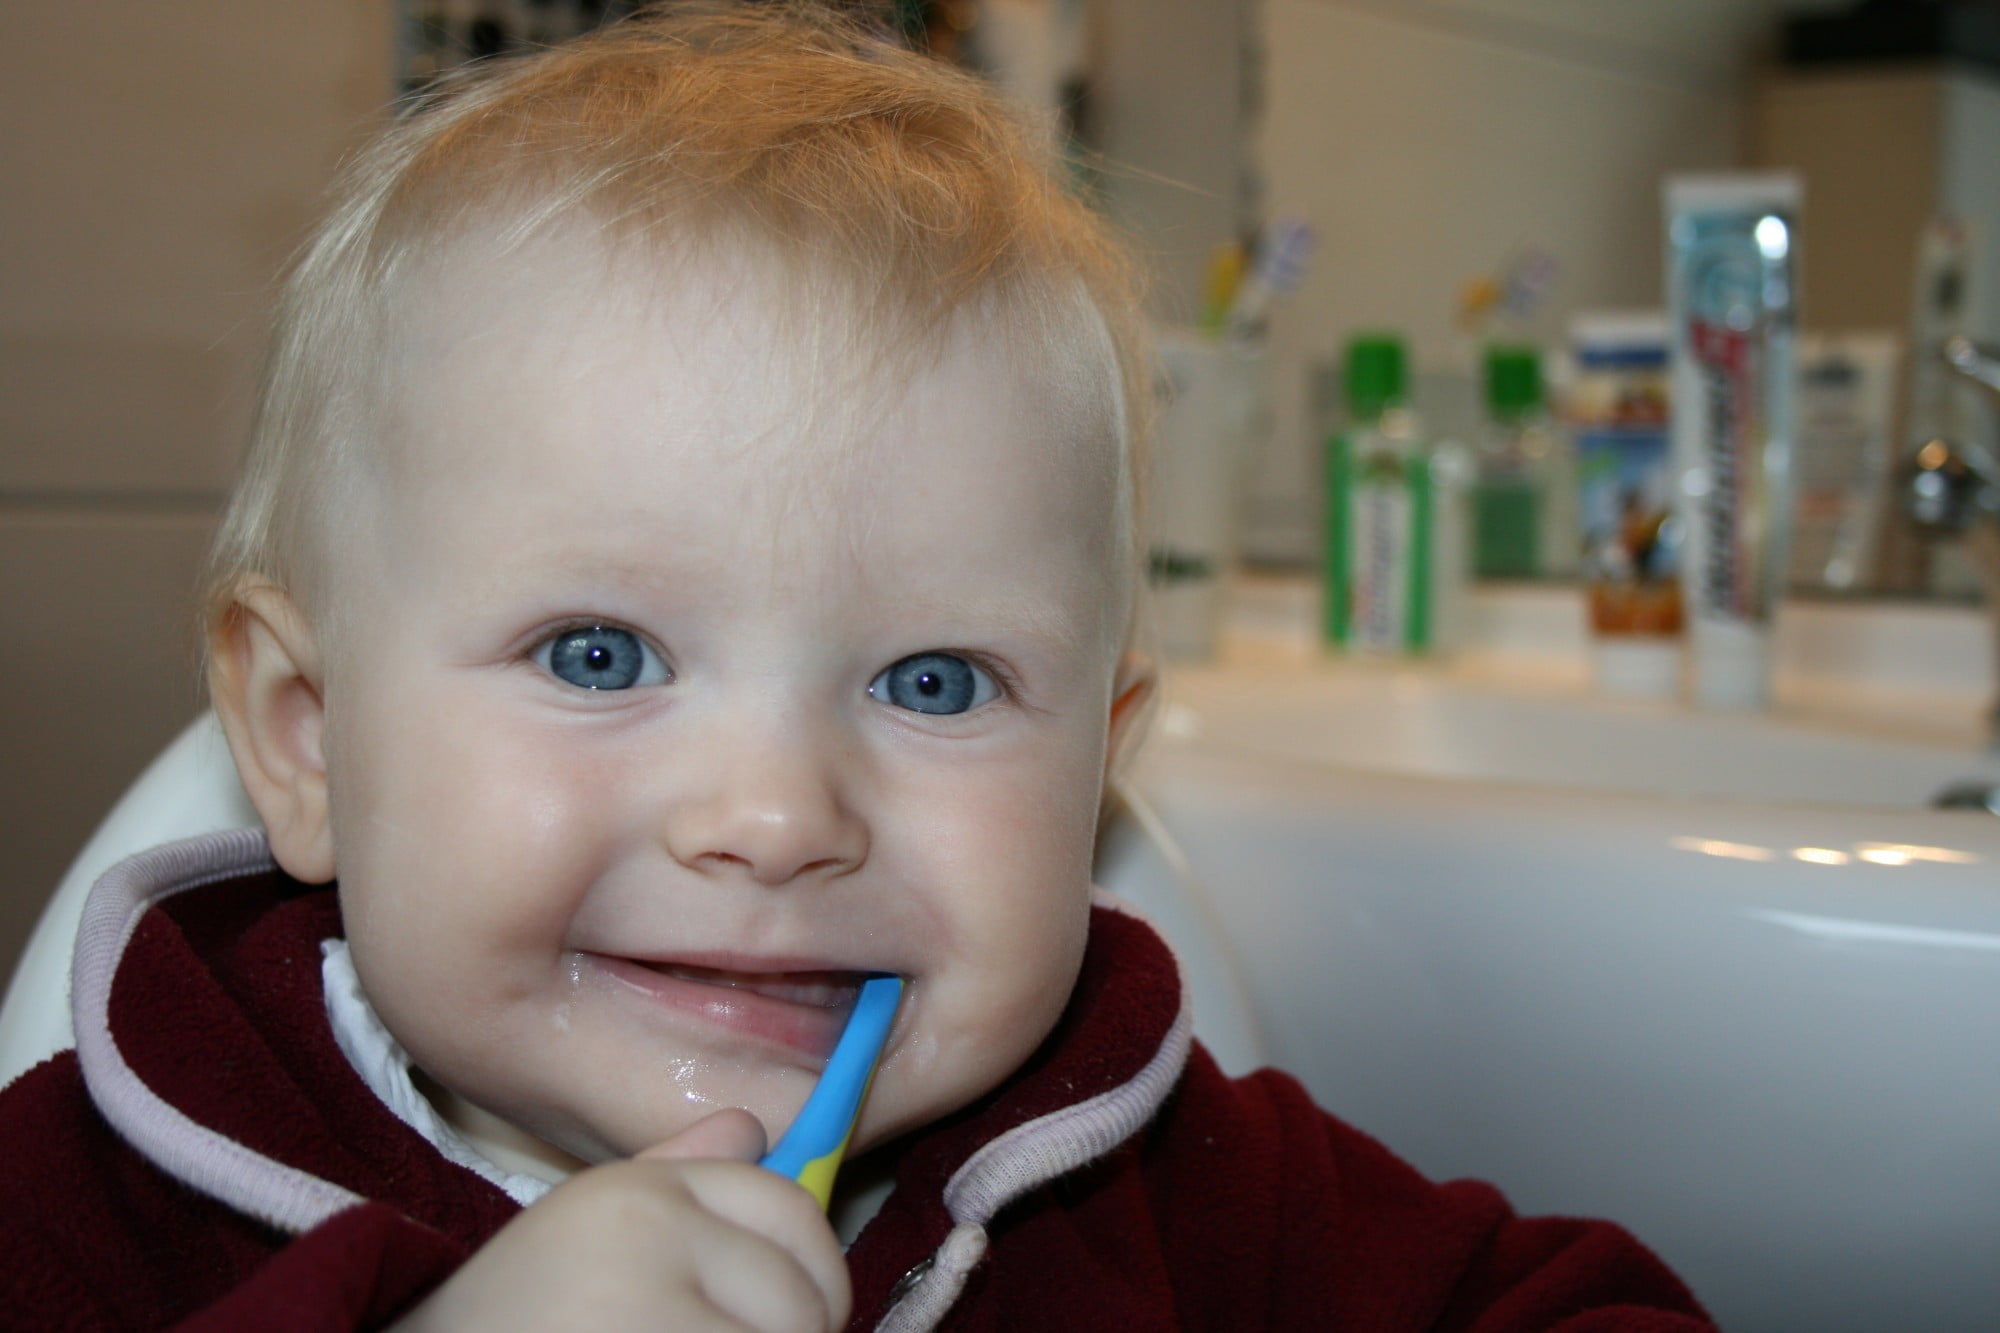 It is important for your child to learn how to properly brush their teeth. Here's a quick guide on how to teach your little one strong tooth brushing habits.